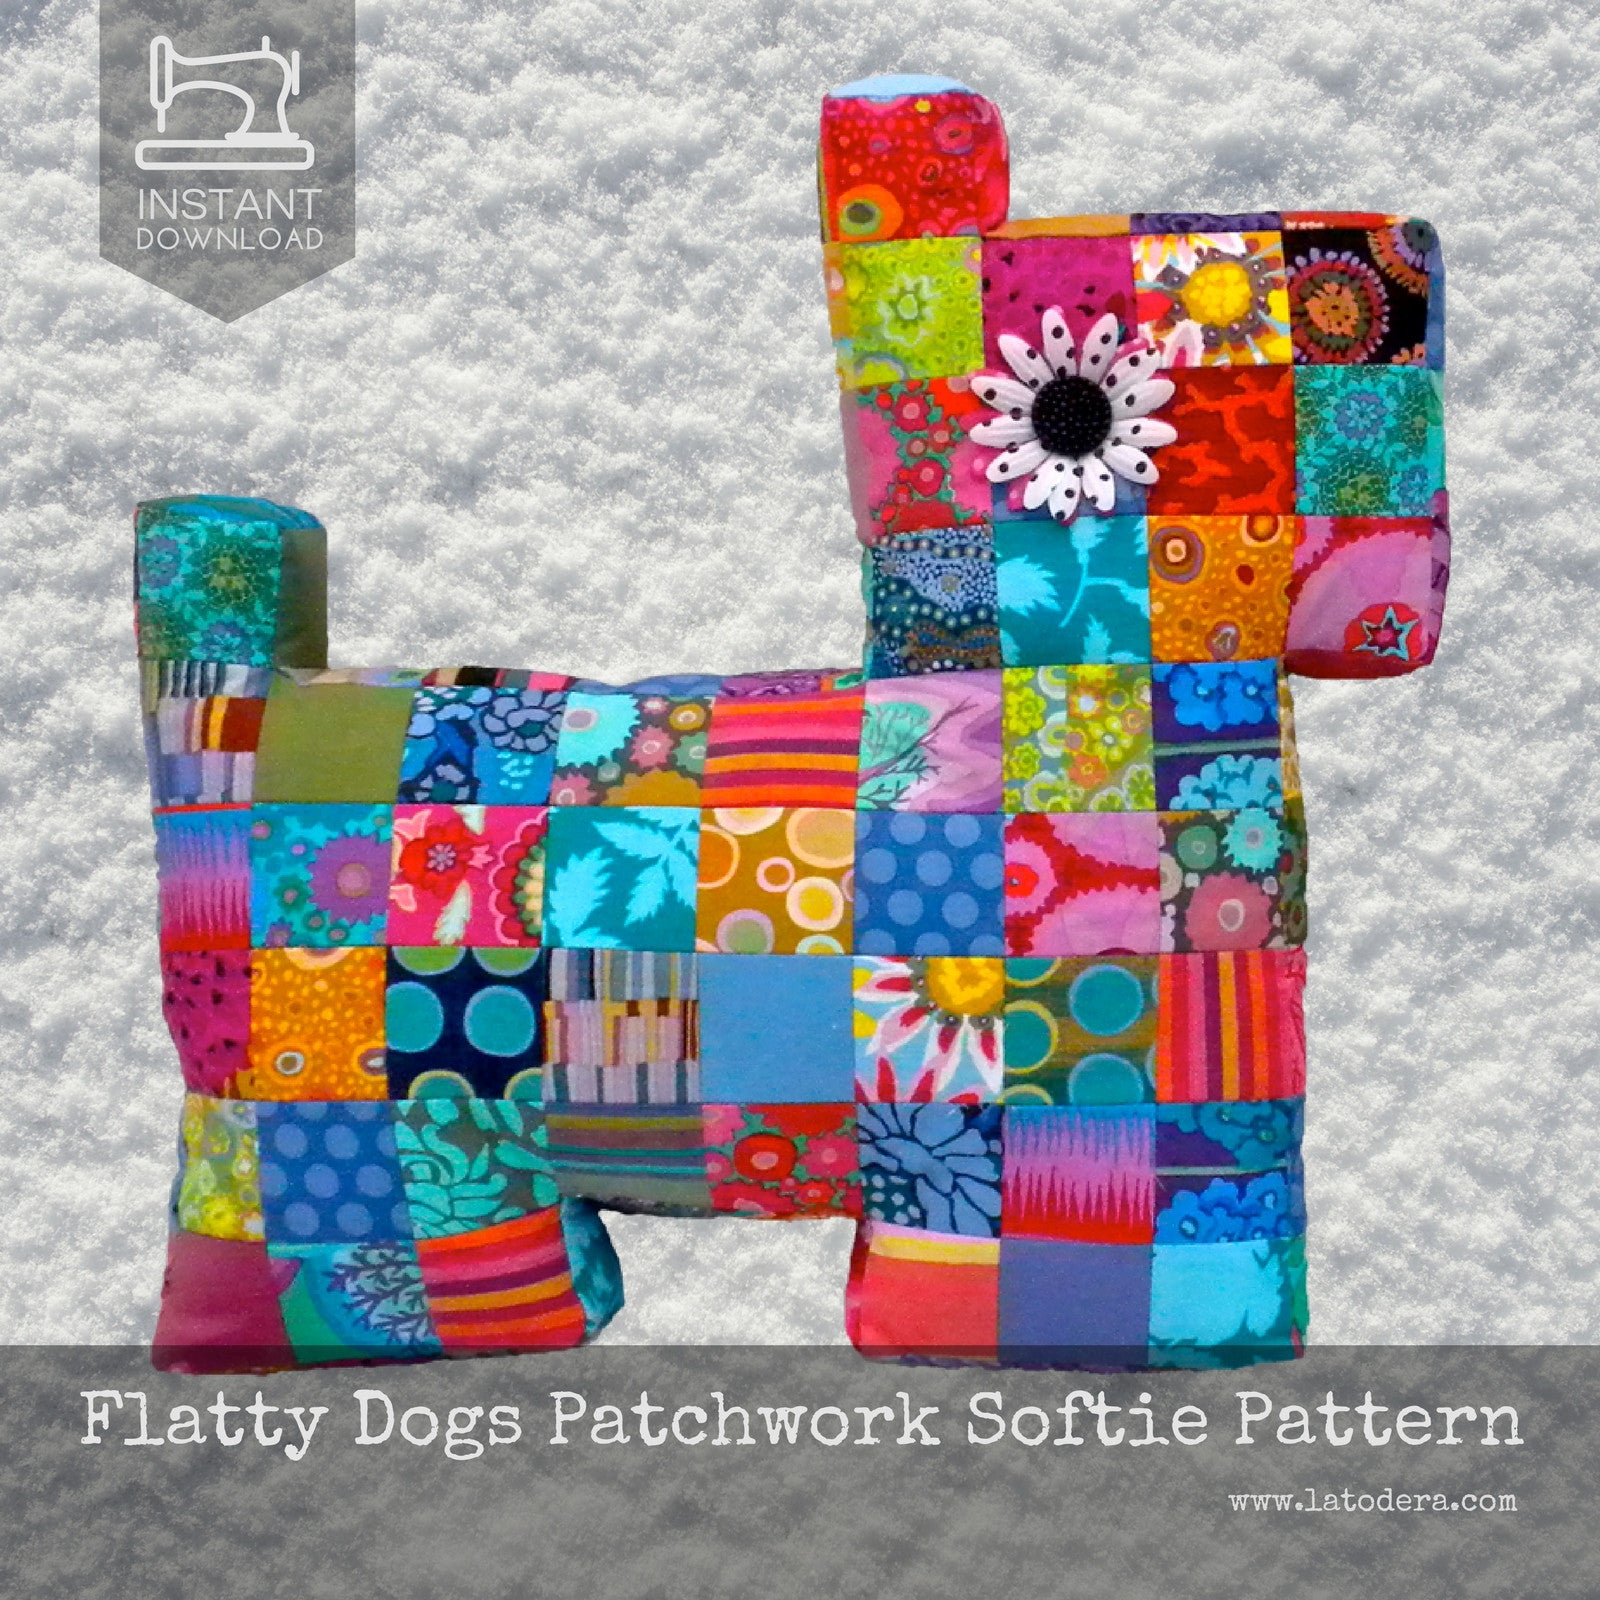 Create Kids Couture: Patchwork Scotty Dog